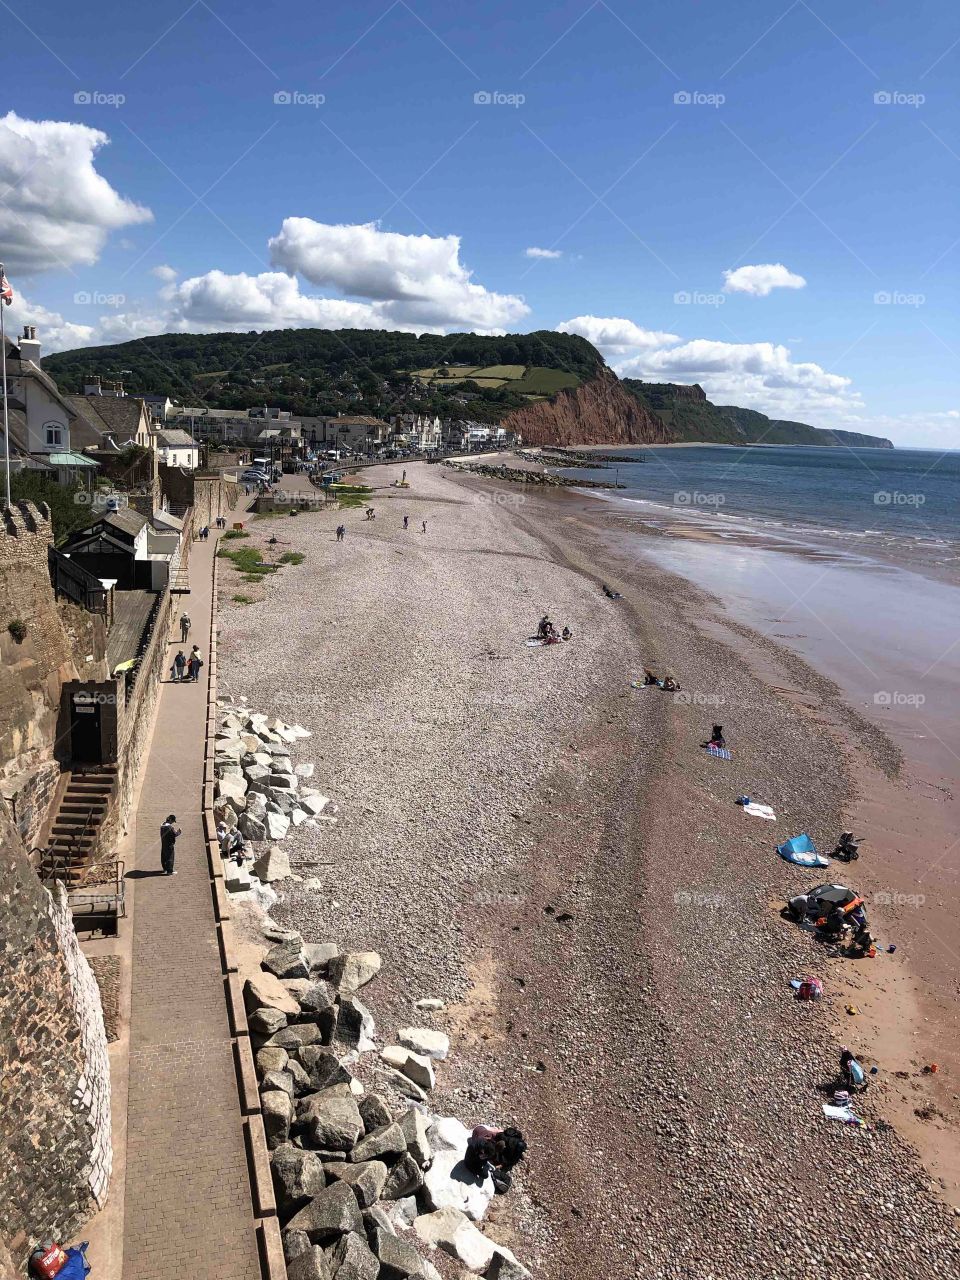 View from in high of Sidmouth Beach, Town Centre end, even though this section is pebbled visitors flock to this landmark beach in August.